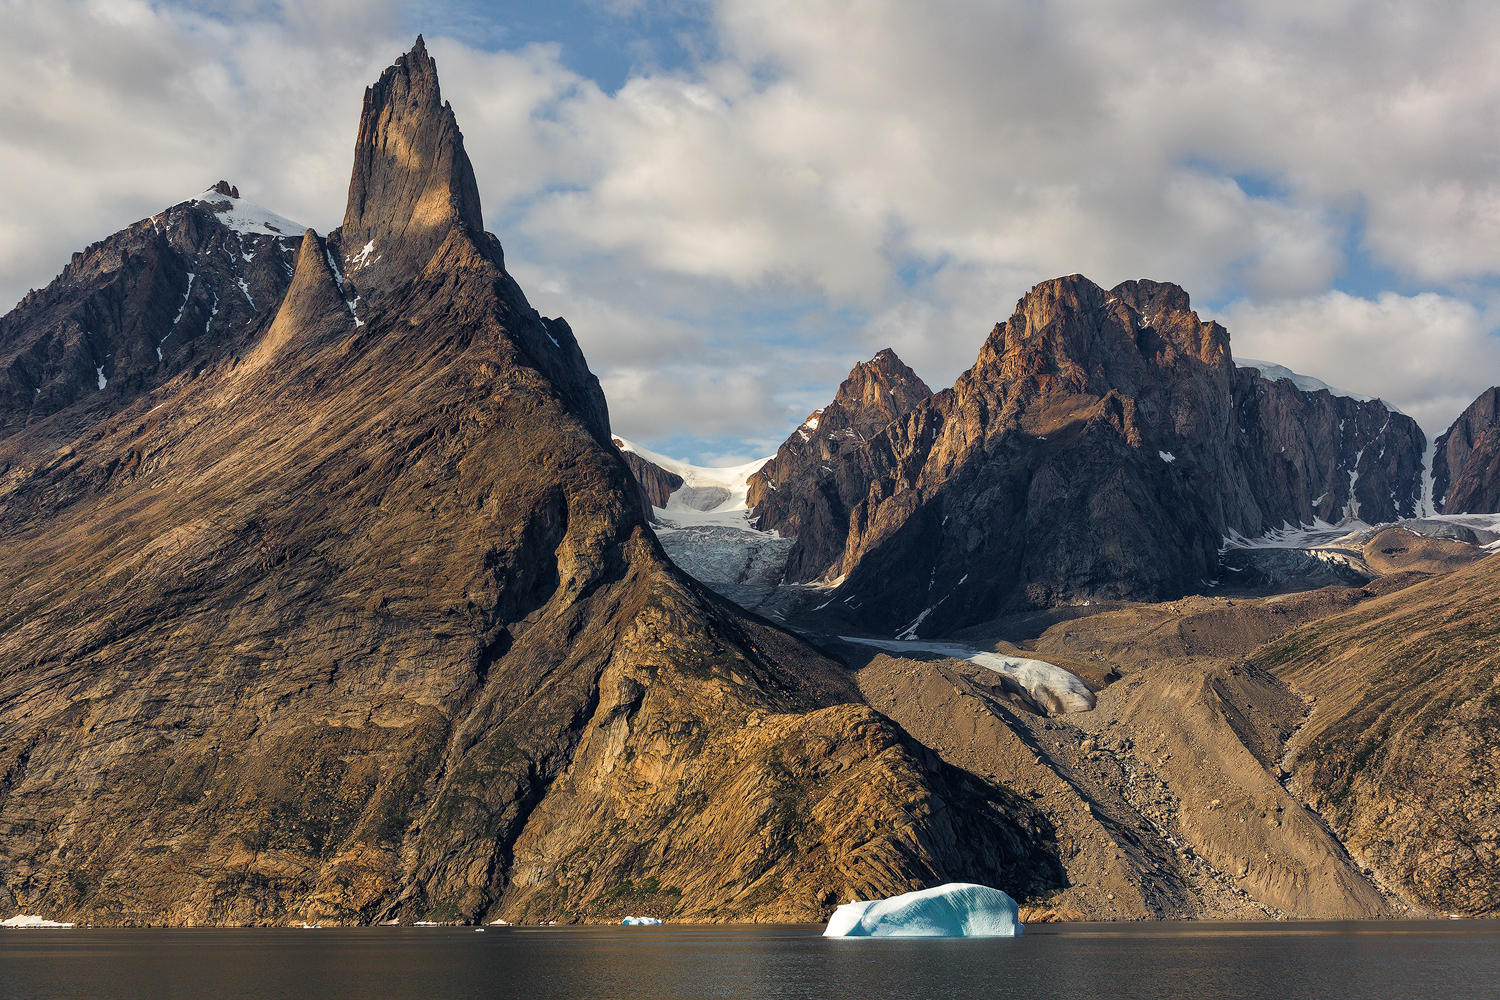 Epic 10 Day Greenland Sailing Trip & Photography Workshop with Transfer from Reykjavik - day 6